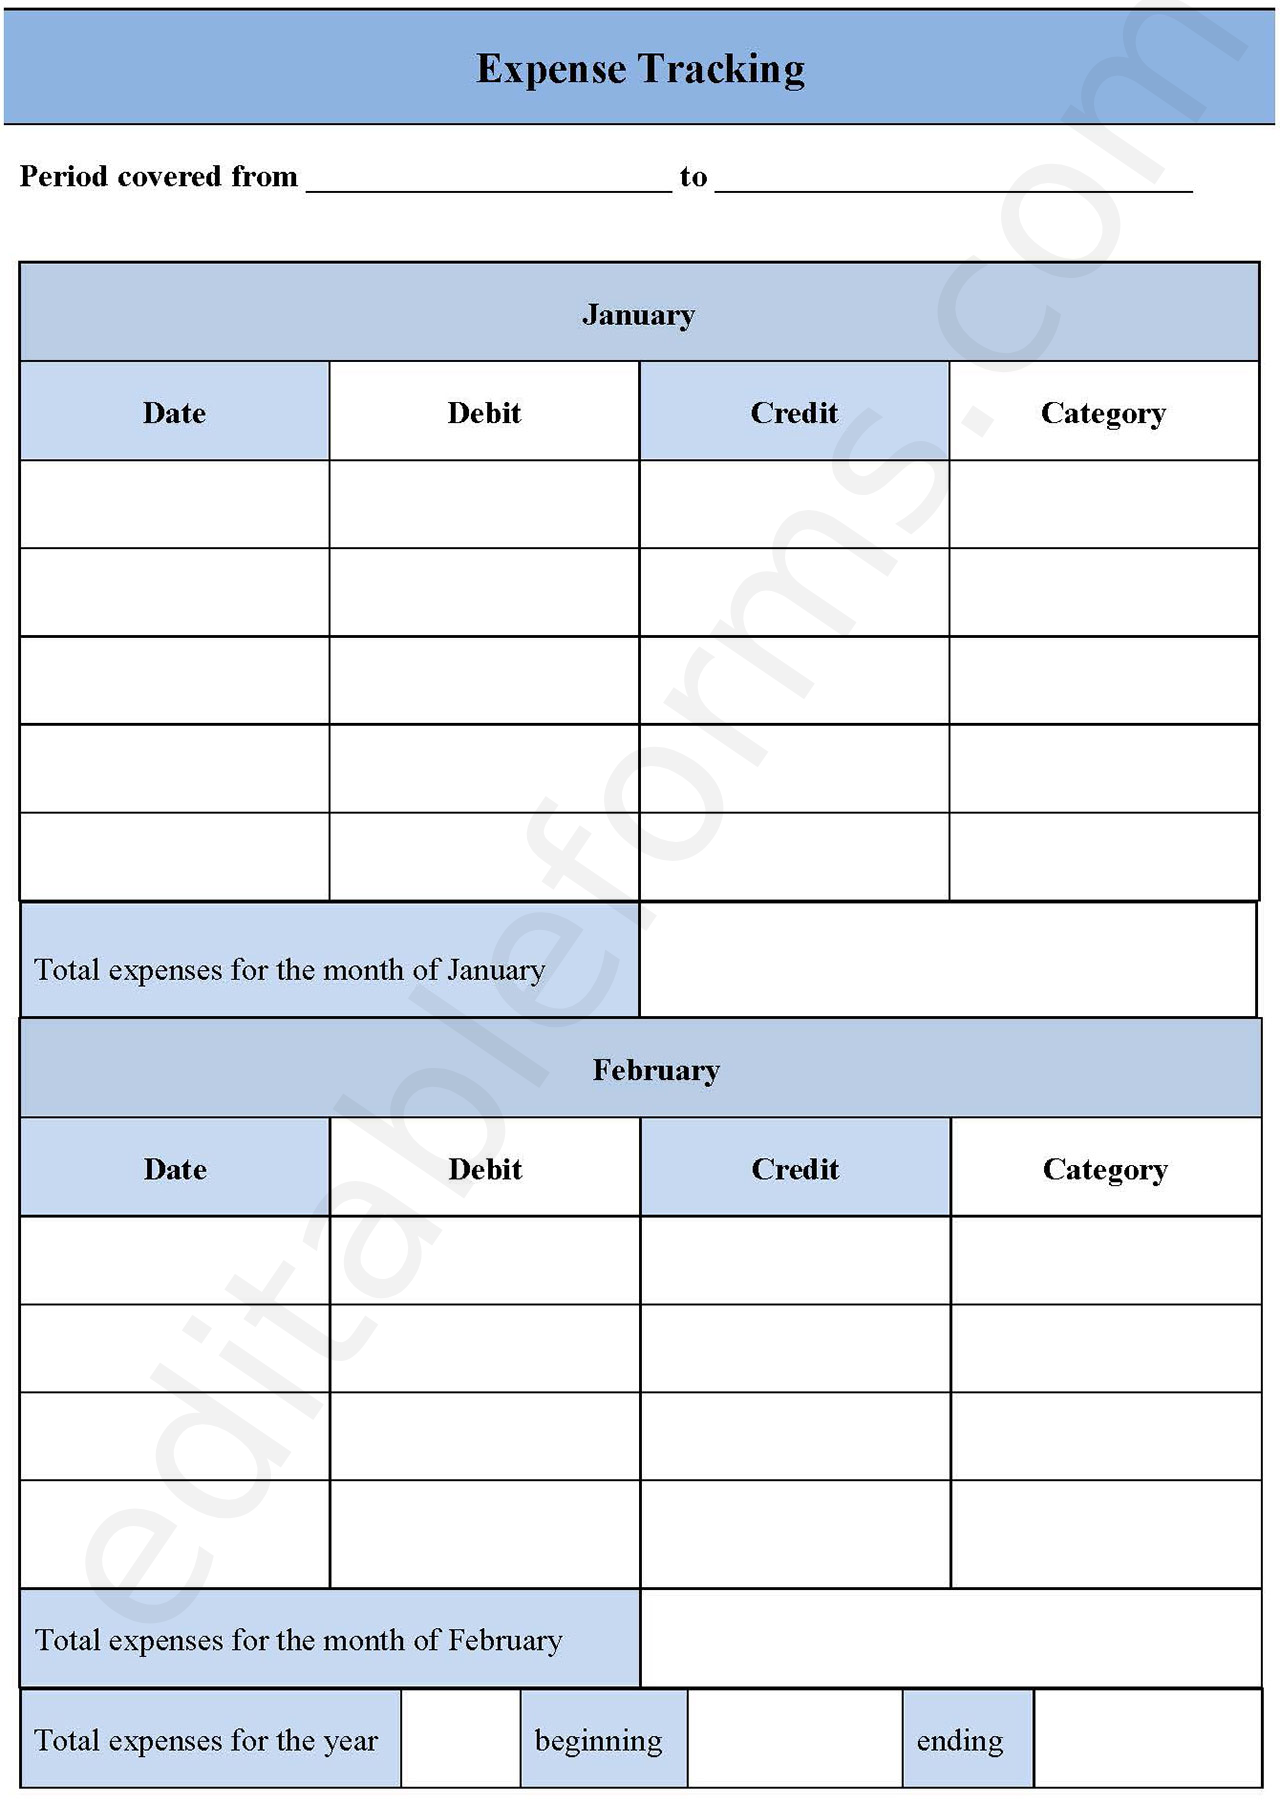 Expense Tracking Fillable PDF Template